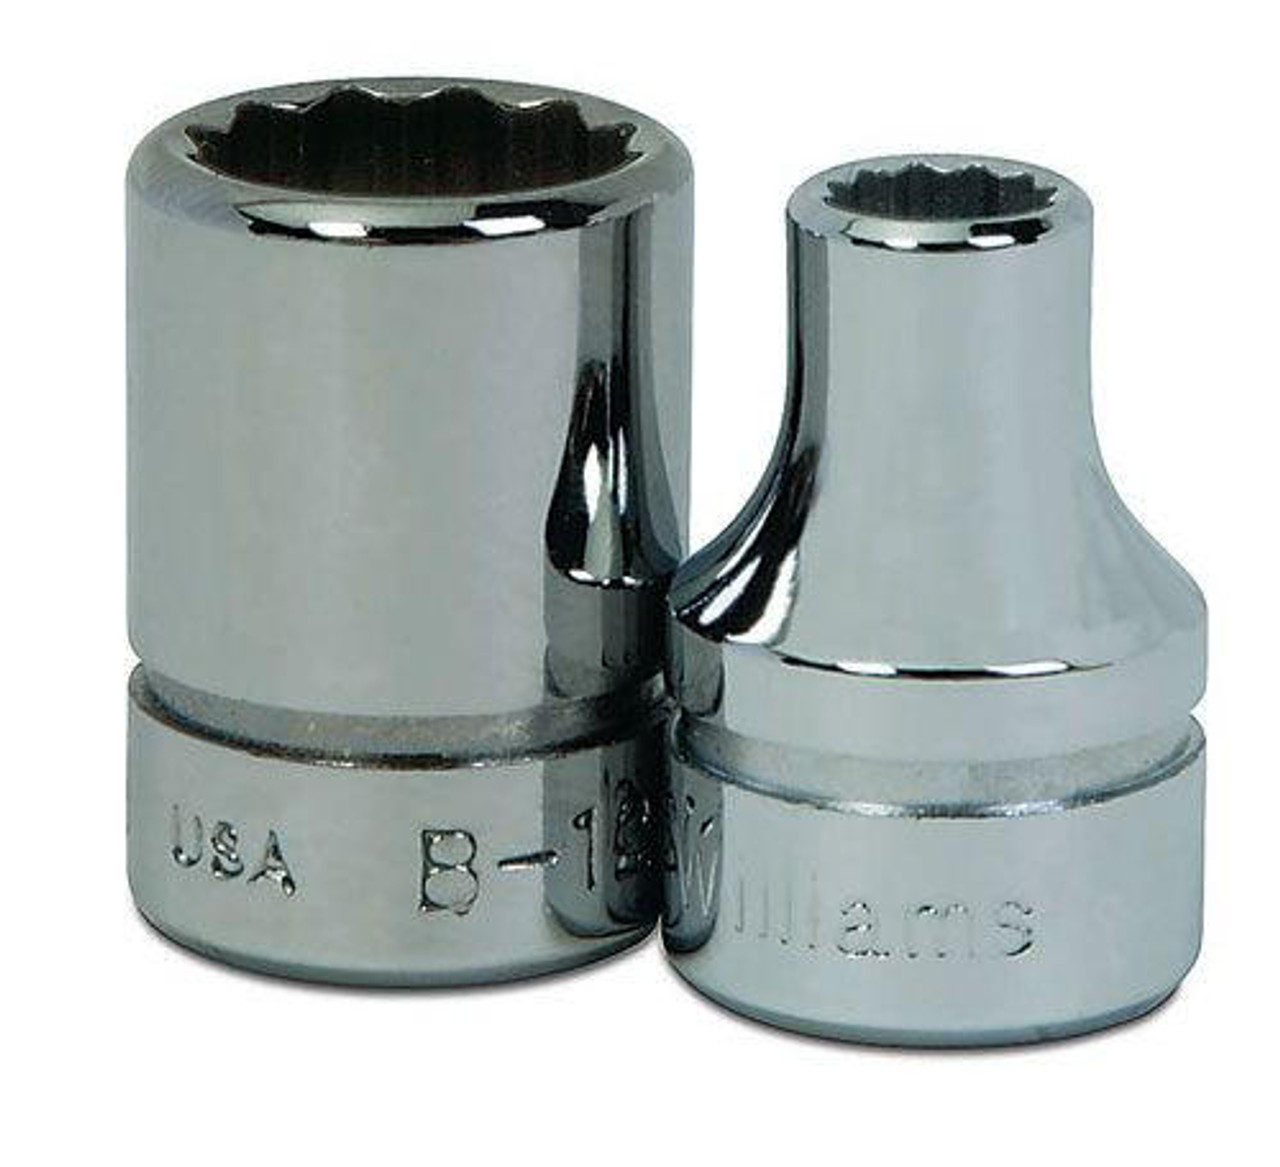 Williams Made In USA 18MM Williams 3/8" Dr Shallow Socket 12 Pt - BM-1218 